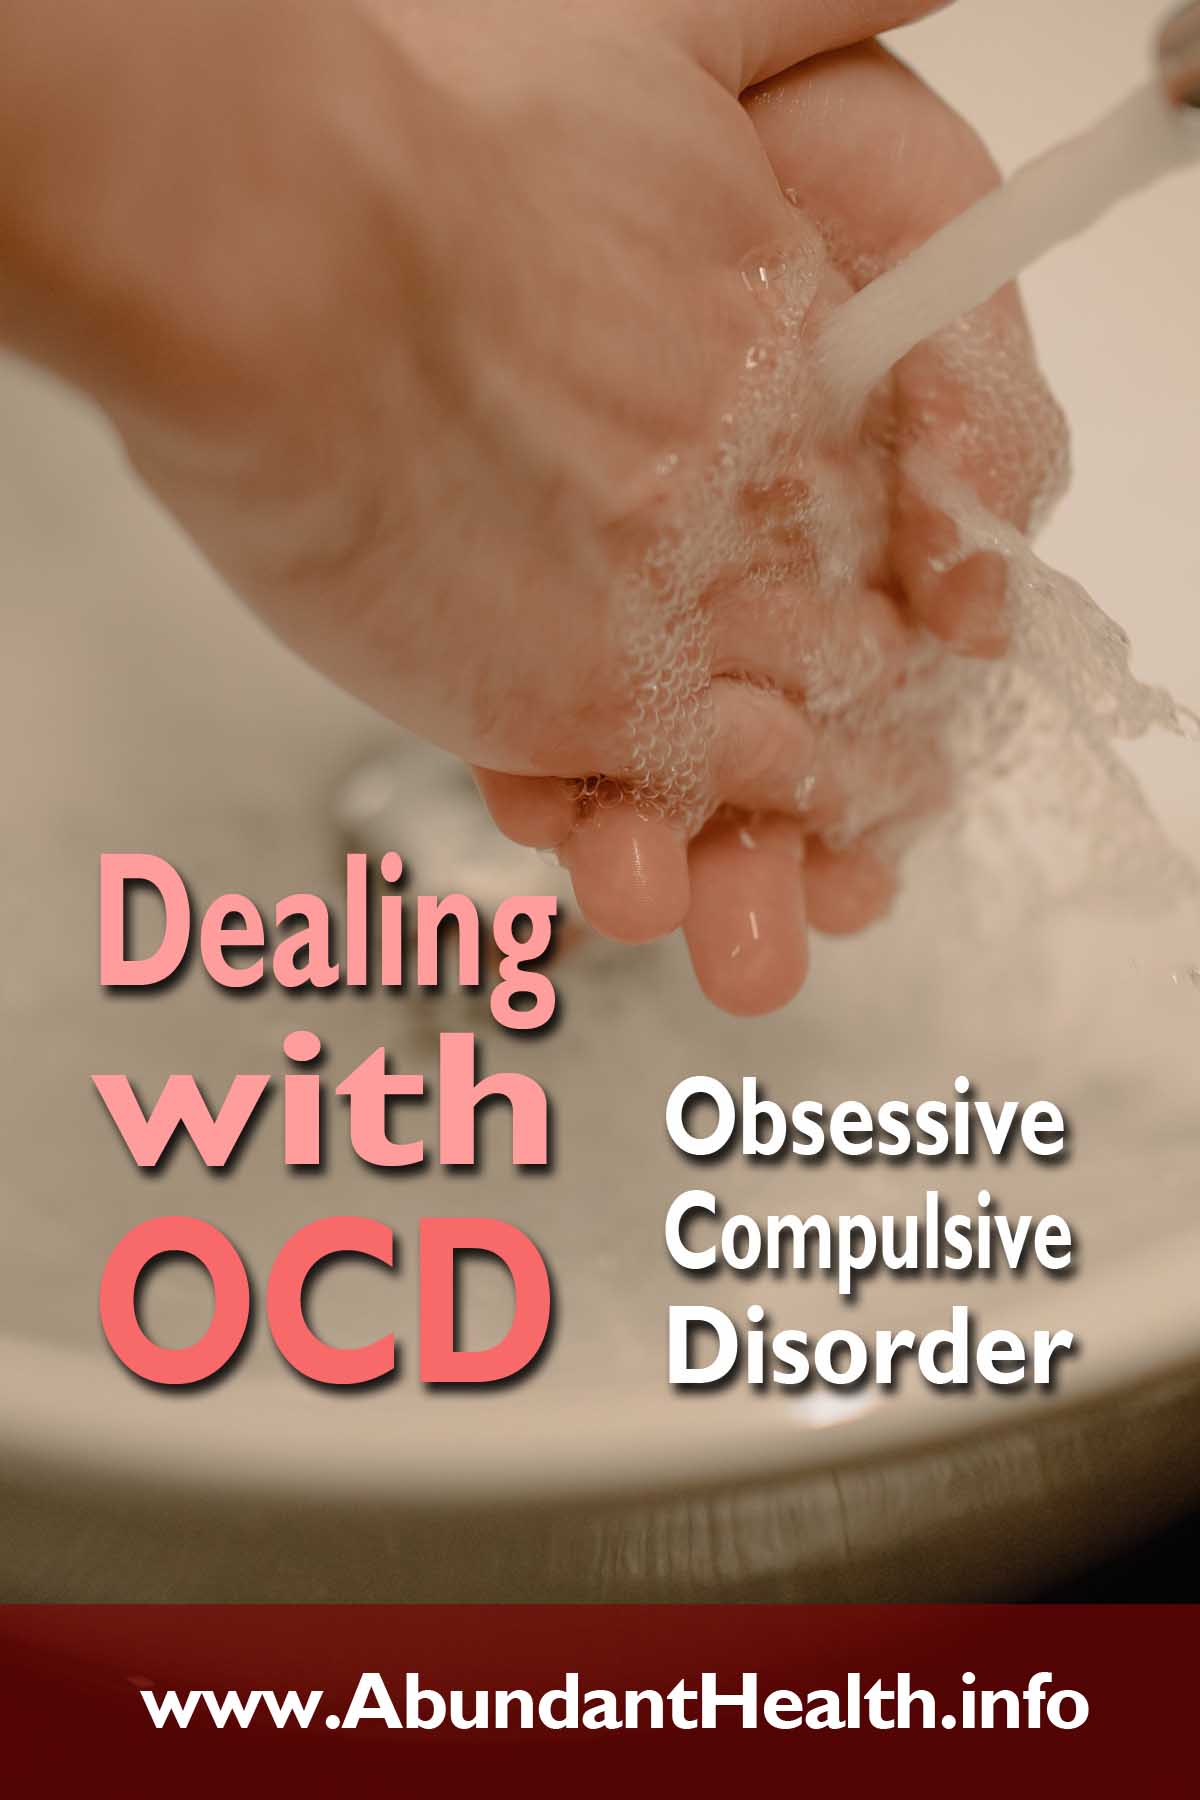 Dealing with OCD - Obsessive-Compulsive Disorder